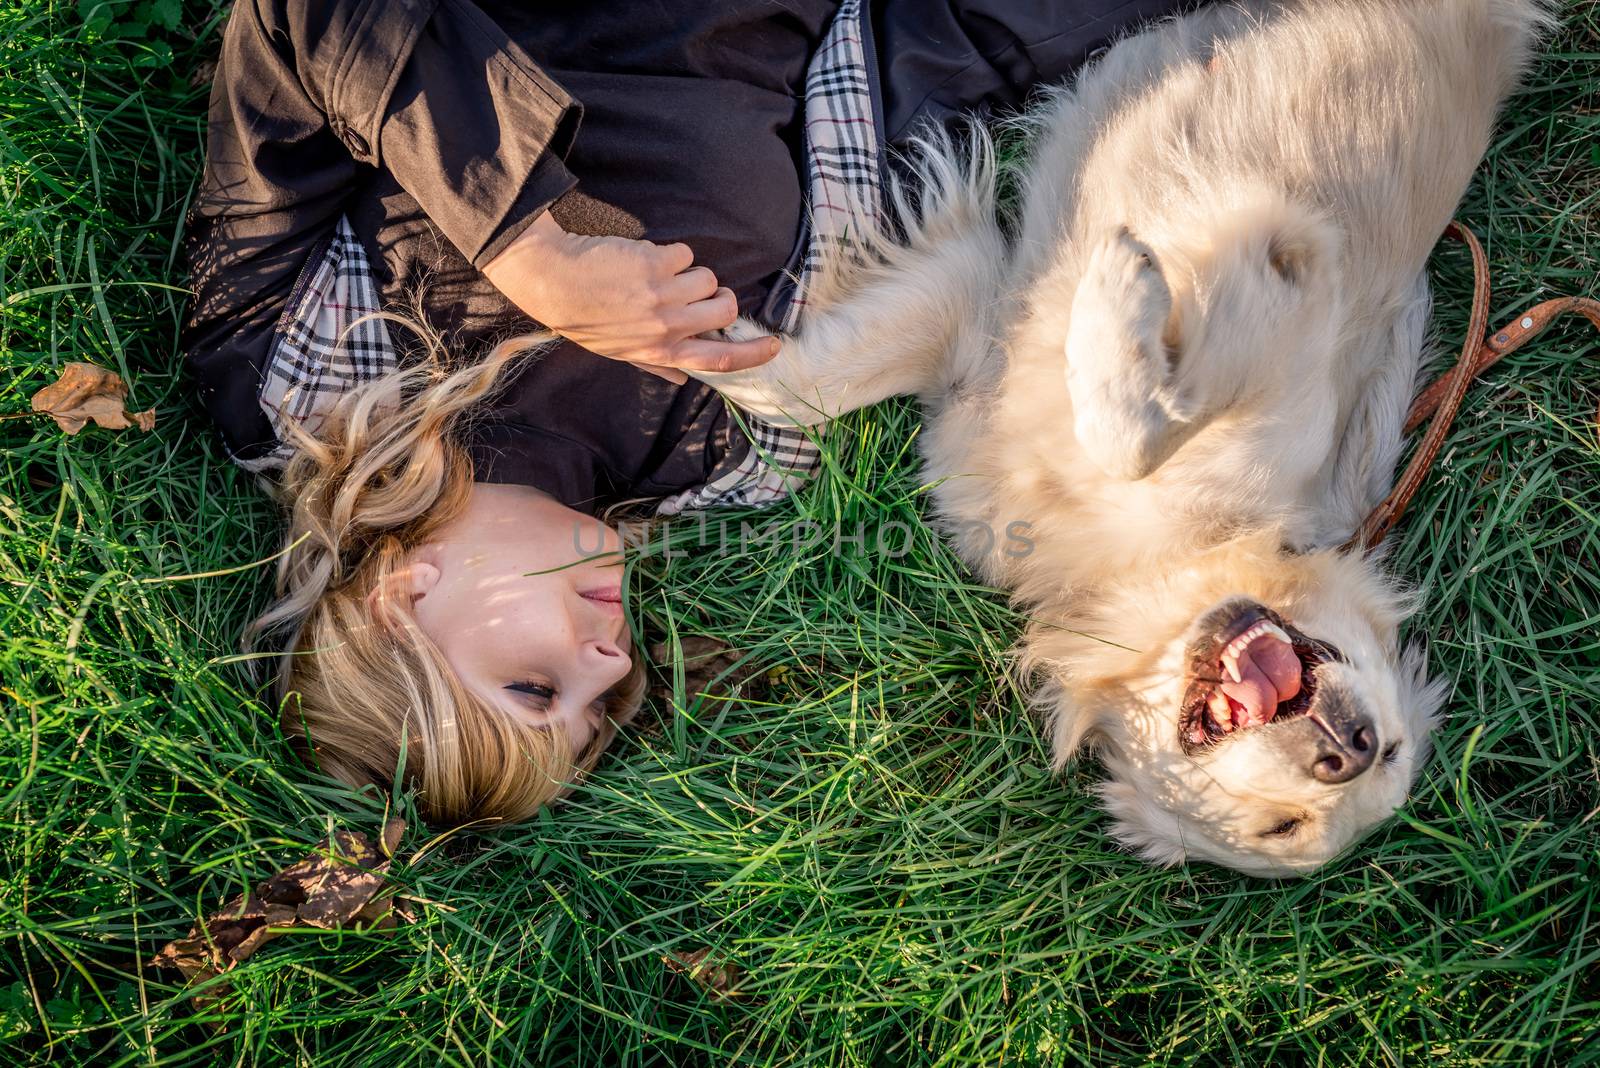 Beautiful caucasian woman laying in the grass with her golden labrador retriever dog at a park in the sunset by Desperada